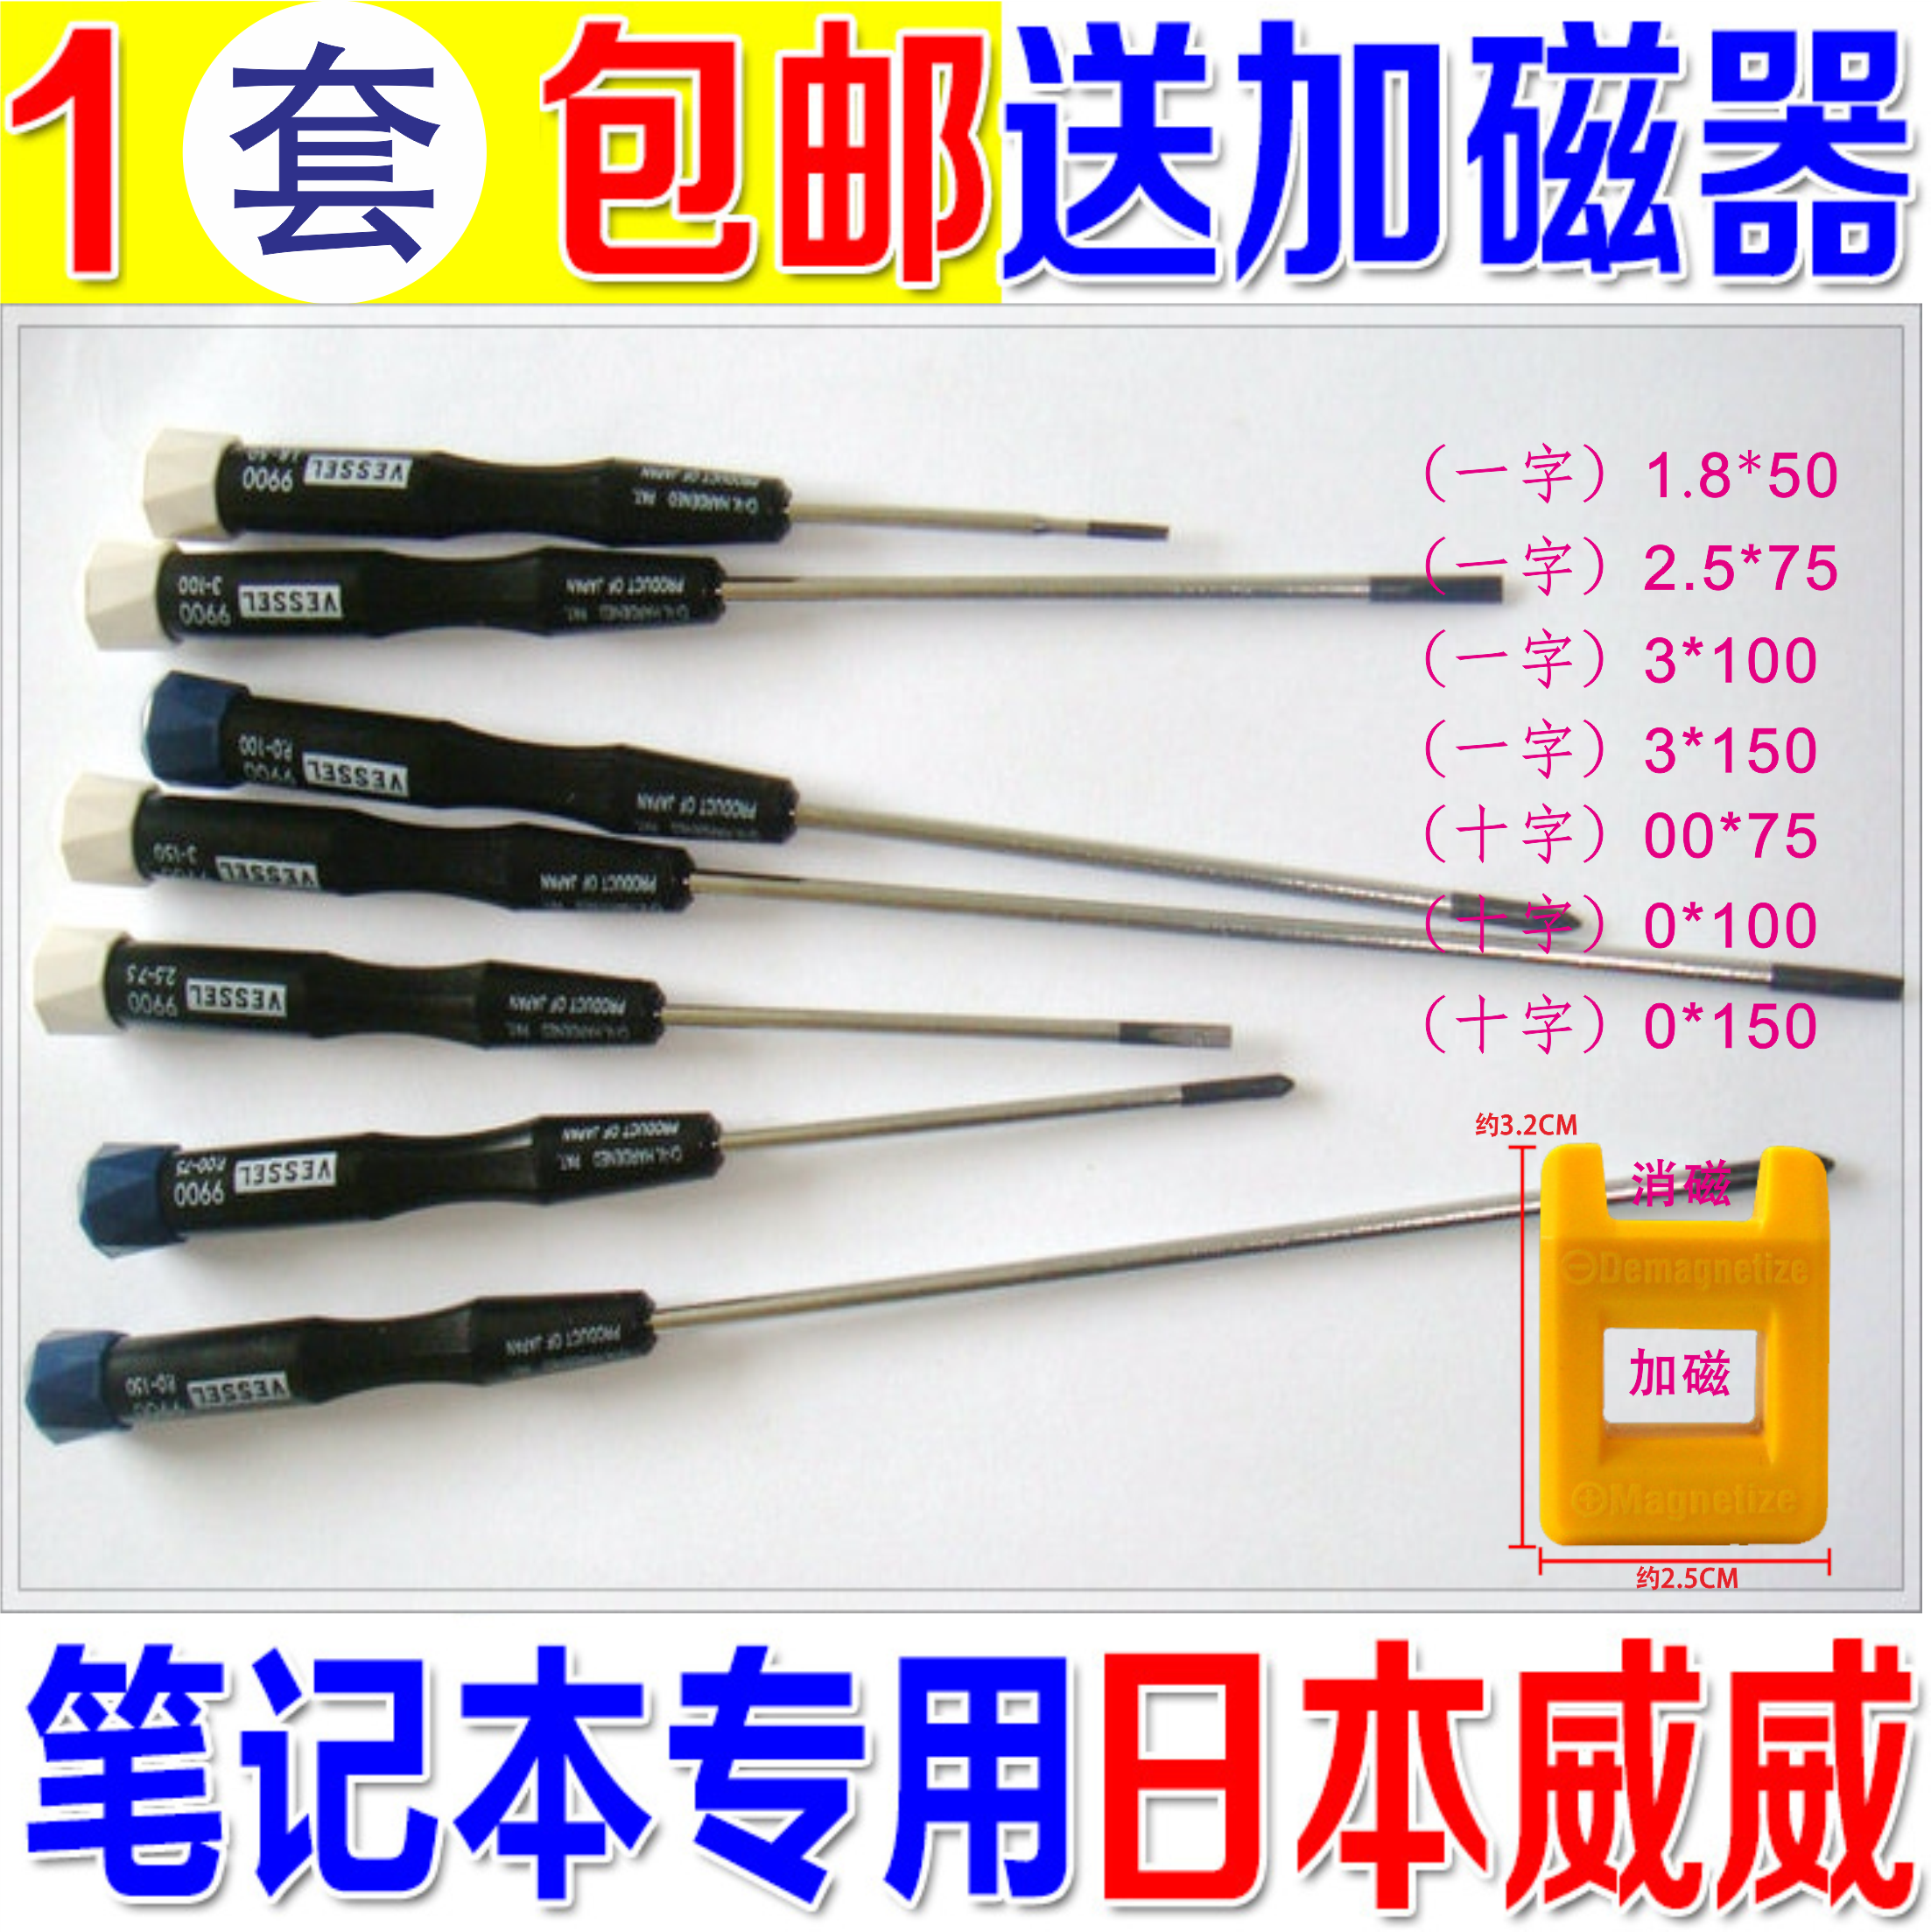 USD 4.71] A set of original imported Japan whiskers screwdriver ...